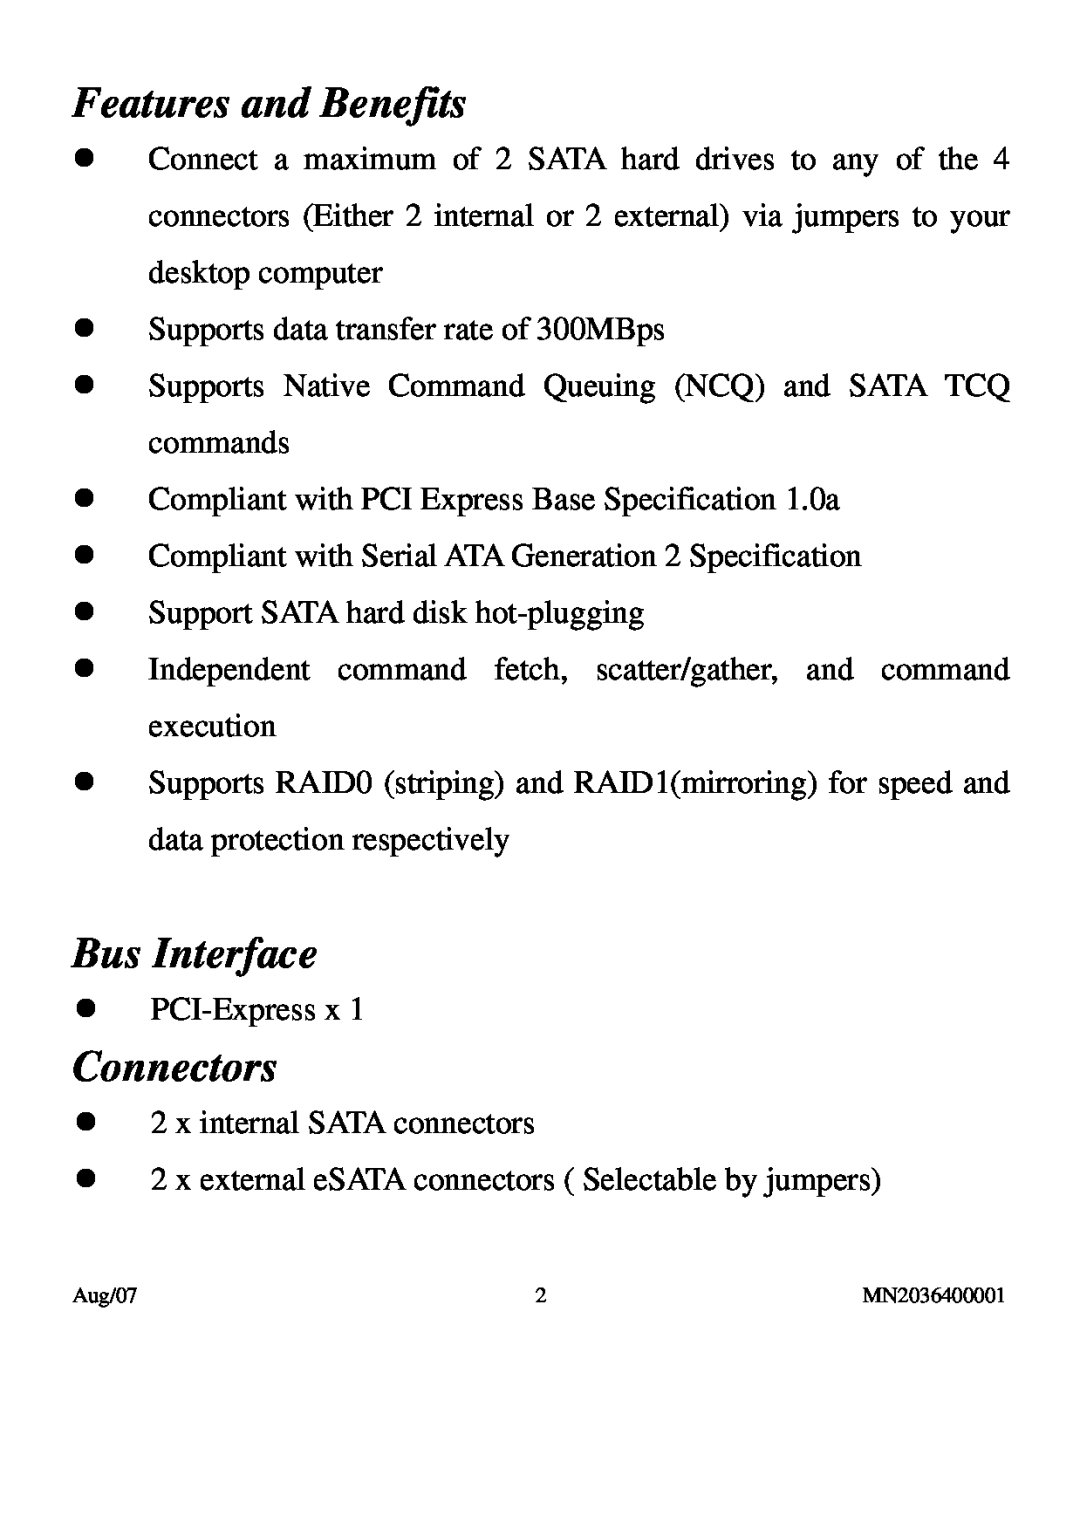 PNY P-DSA2-PCIE-RF user manual Features and Benefits, Bus Interface, Connectors 